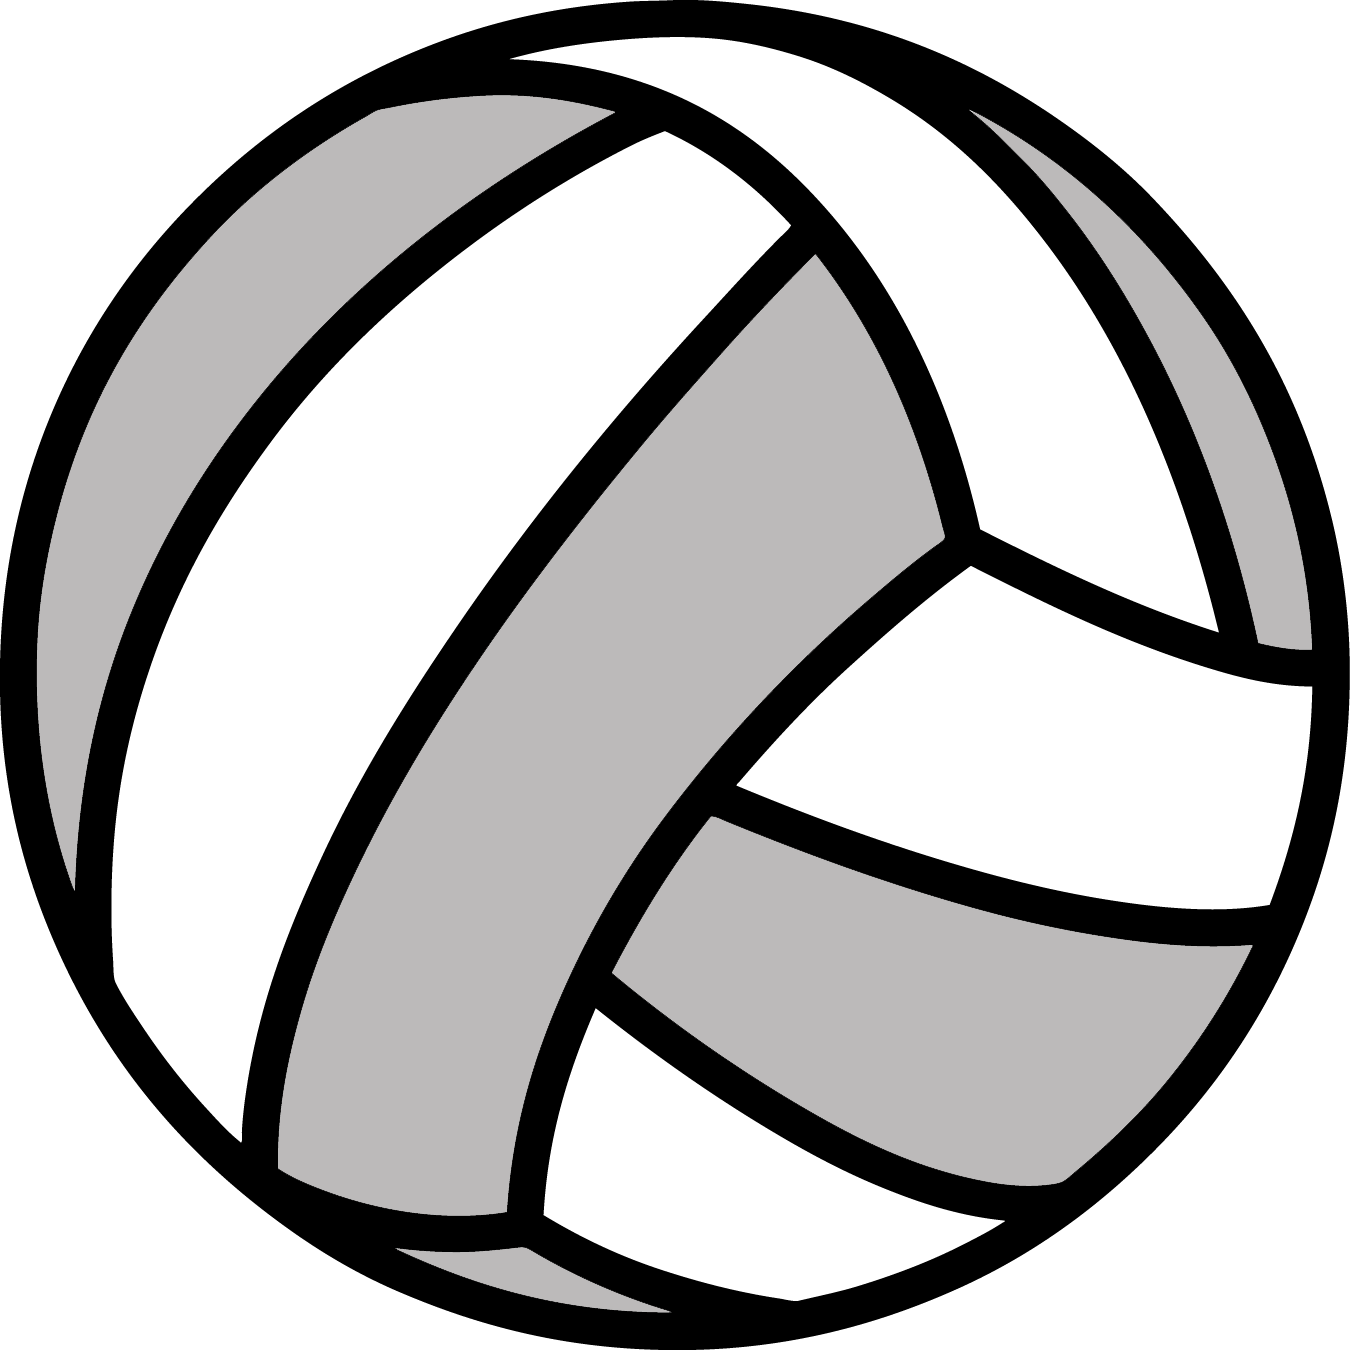 Volleyball Clip art - Volleyball PNG png download - 1350*1350 - Free ...